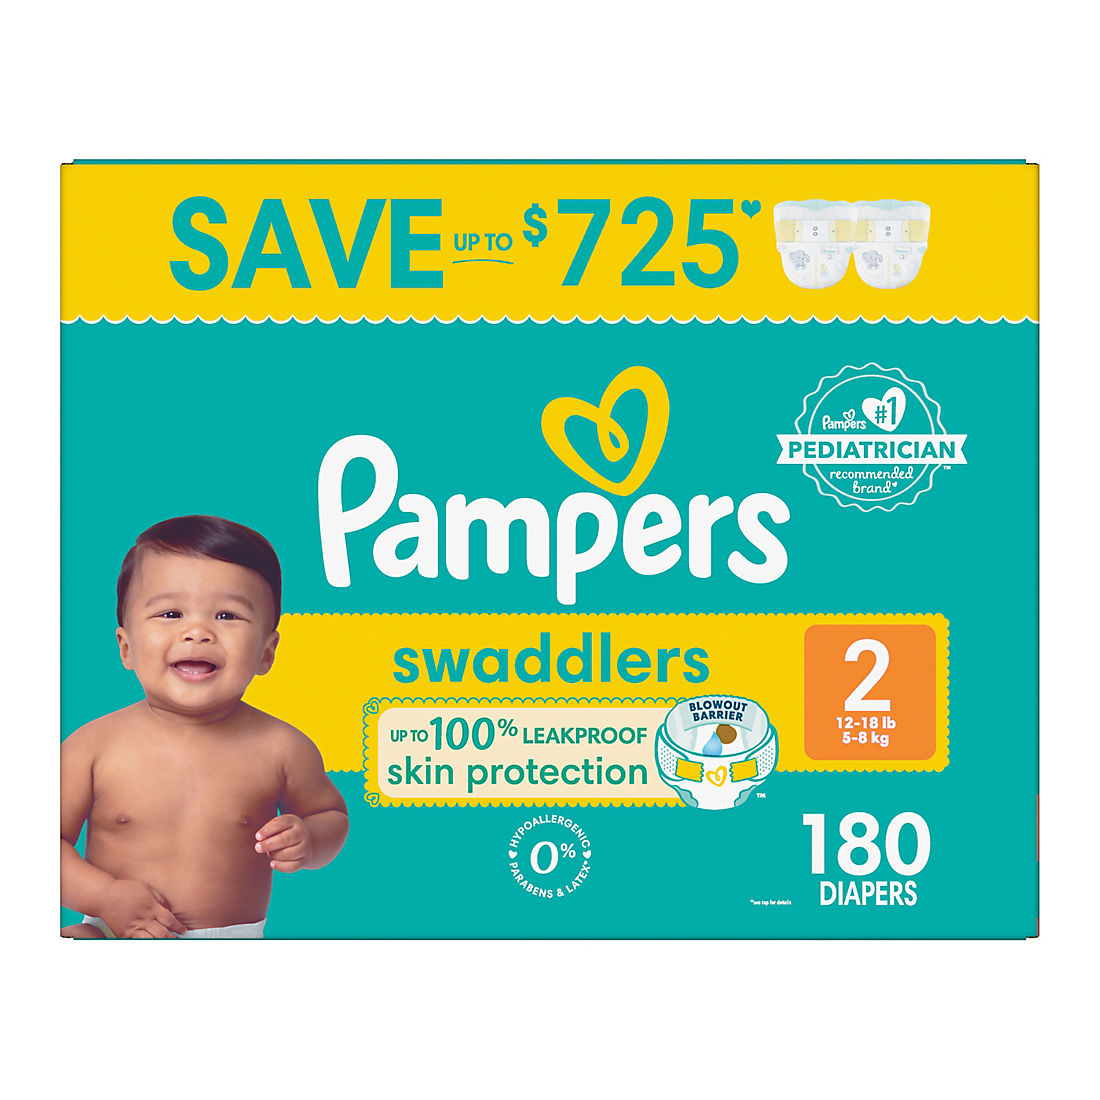 Pampers 12 Hr Baby Dry Disposable Baby Diapers 1,2,3,4,5,6 Choose Your Size New 